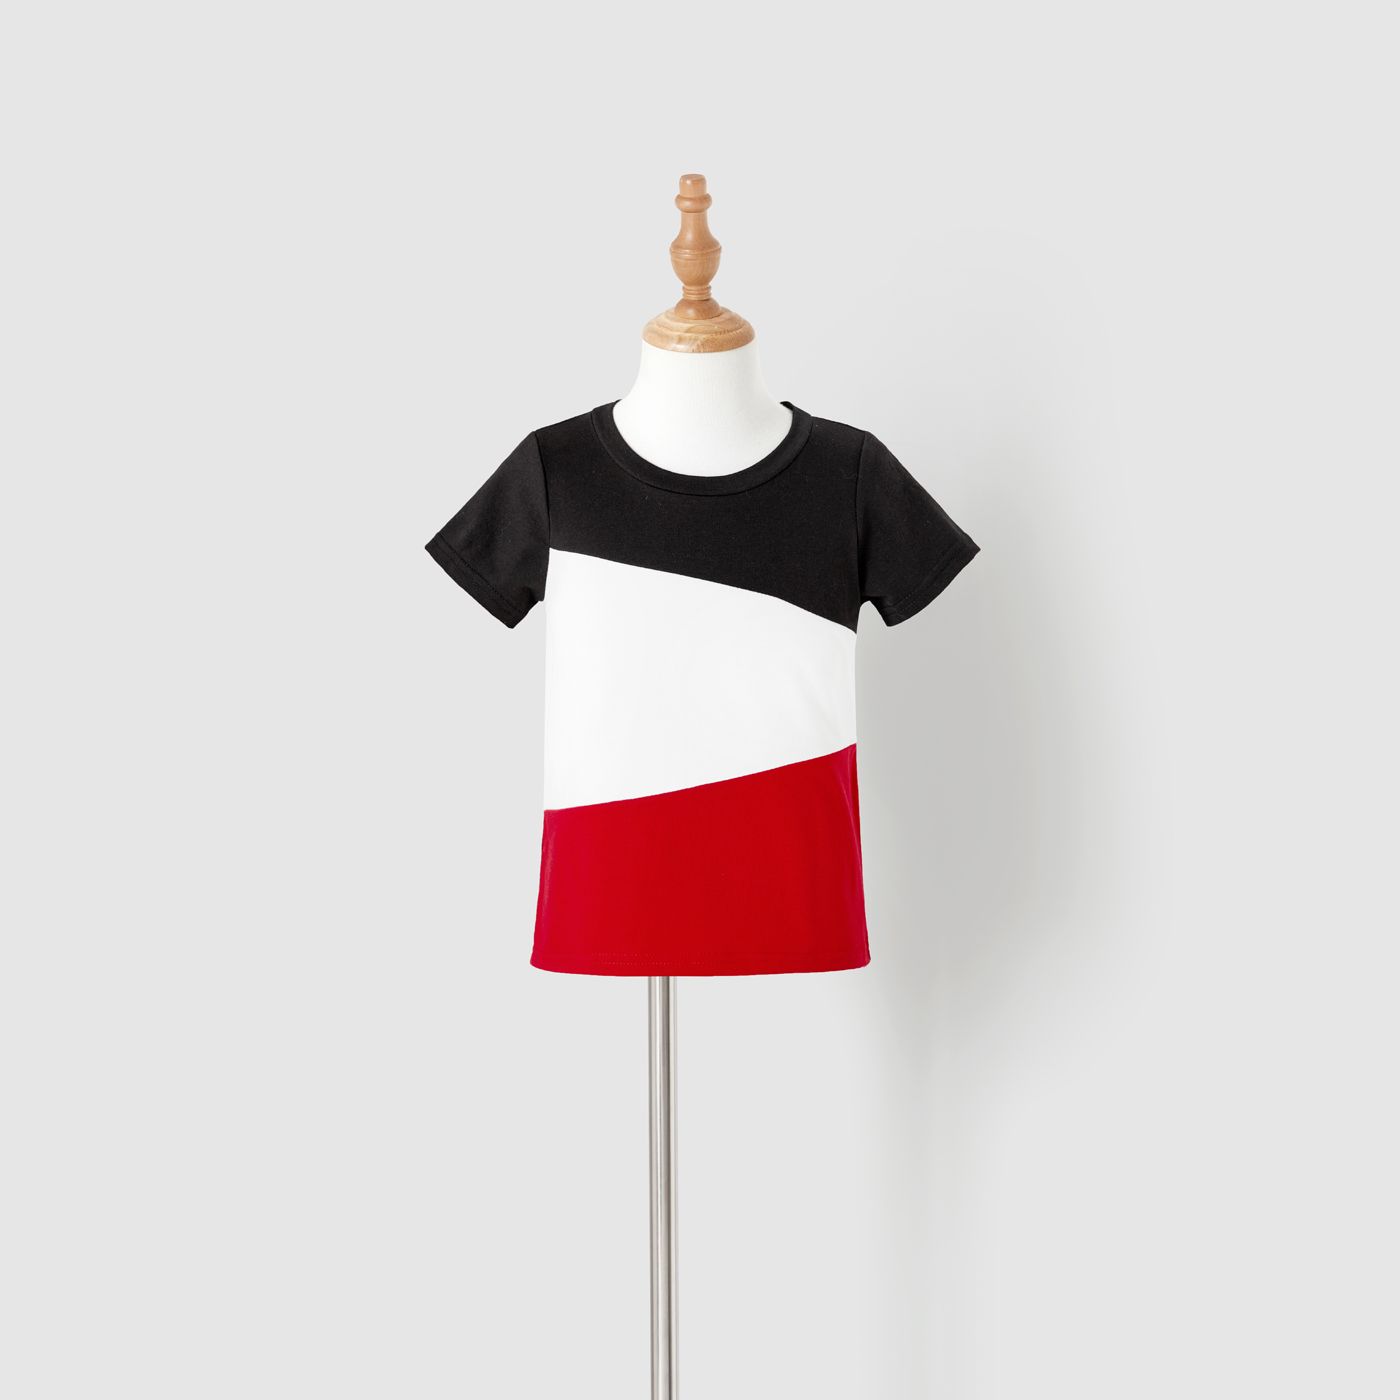 Family Matching Polka Dot Print Tie Neck Sleeveless Red Spliced Dresses And Short-sleeve Colorblock T-shirts Sets